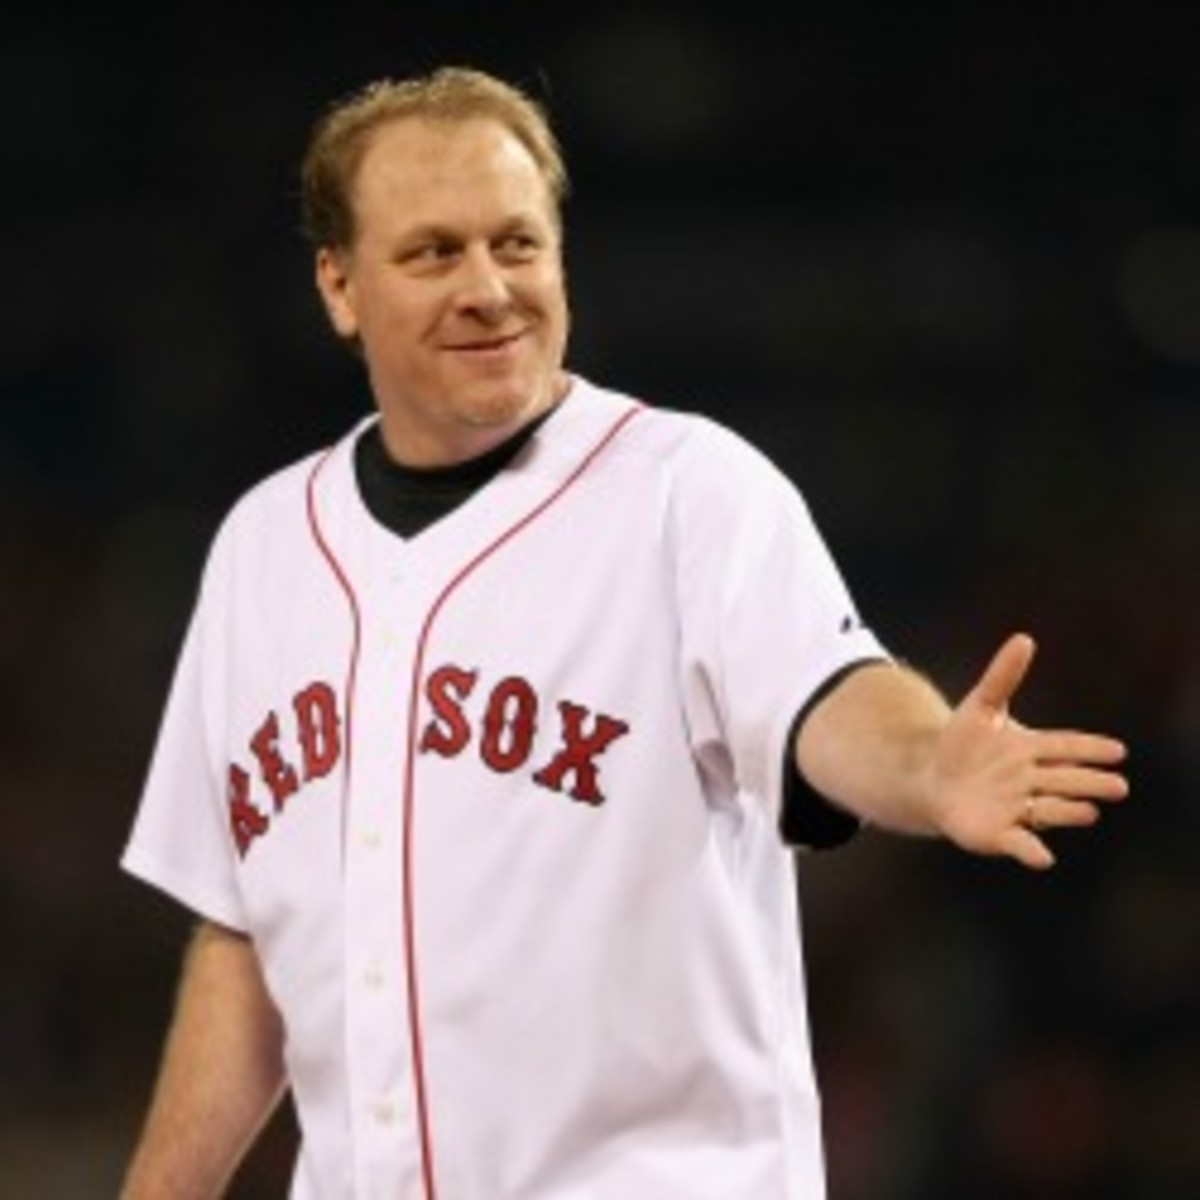 Former Red Sox pitcher Curt Schilling accused medical staffer Mike Reinold of suggesting PEDs as an option to recover from a shoulder injury in 2008. (Elsa/Getty Images)